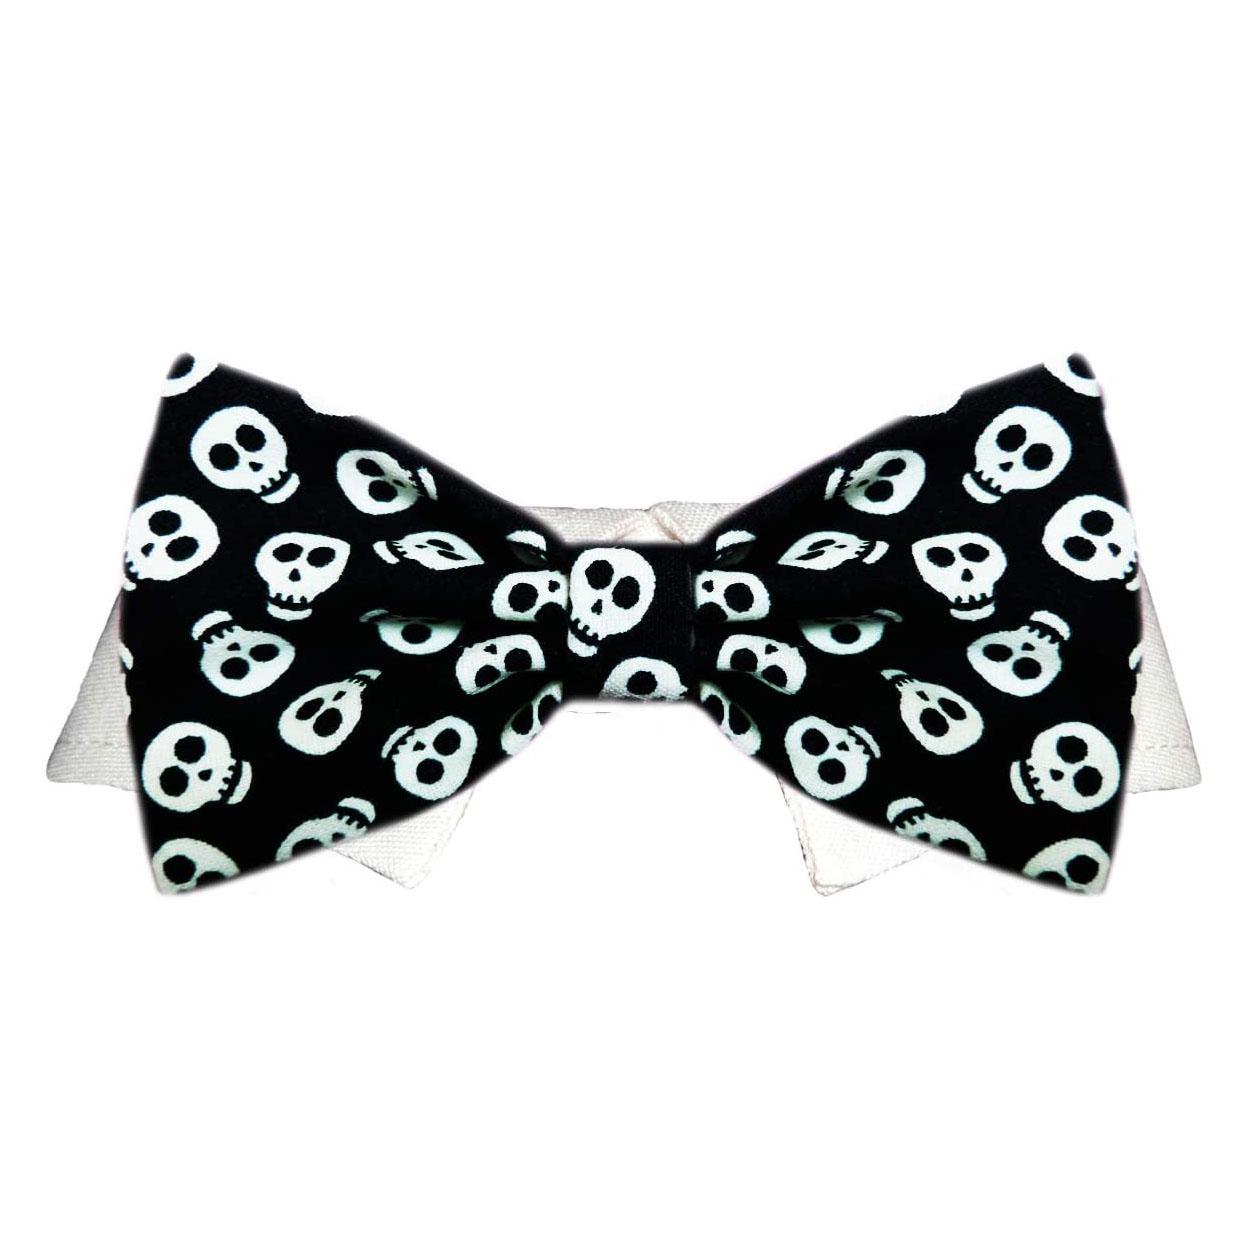 Pooch Outfitters Skully Dog Shirt Collar and Bow Tie - Black